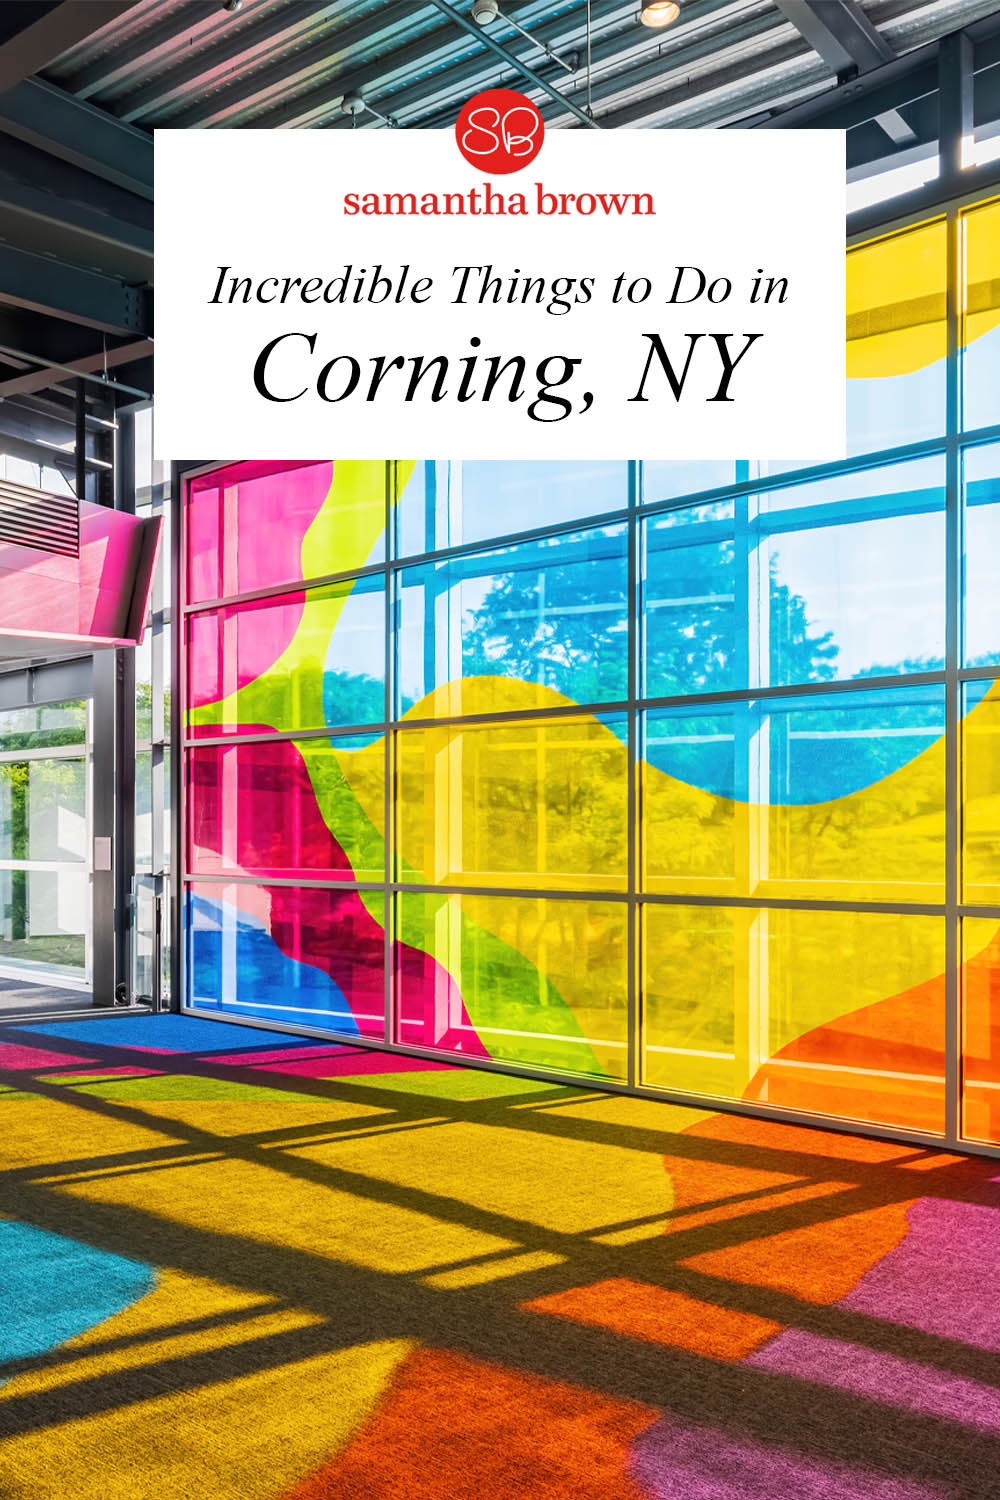 Things to do in Corning